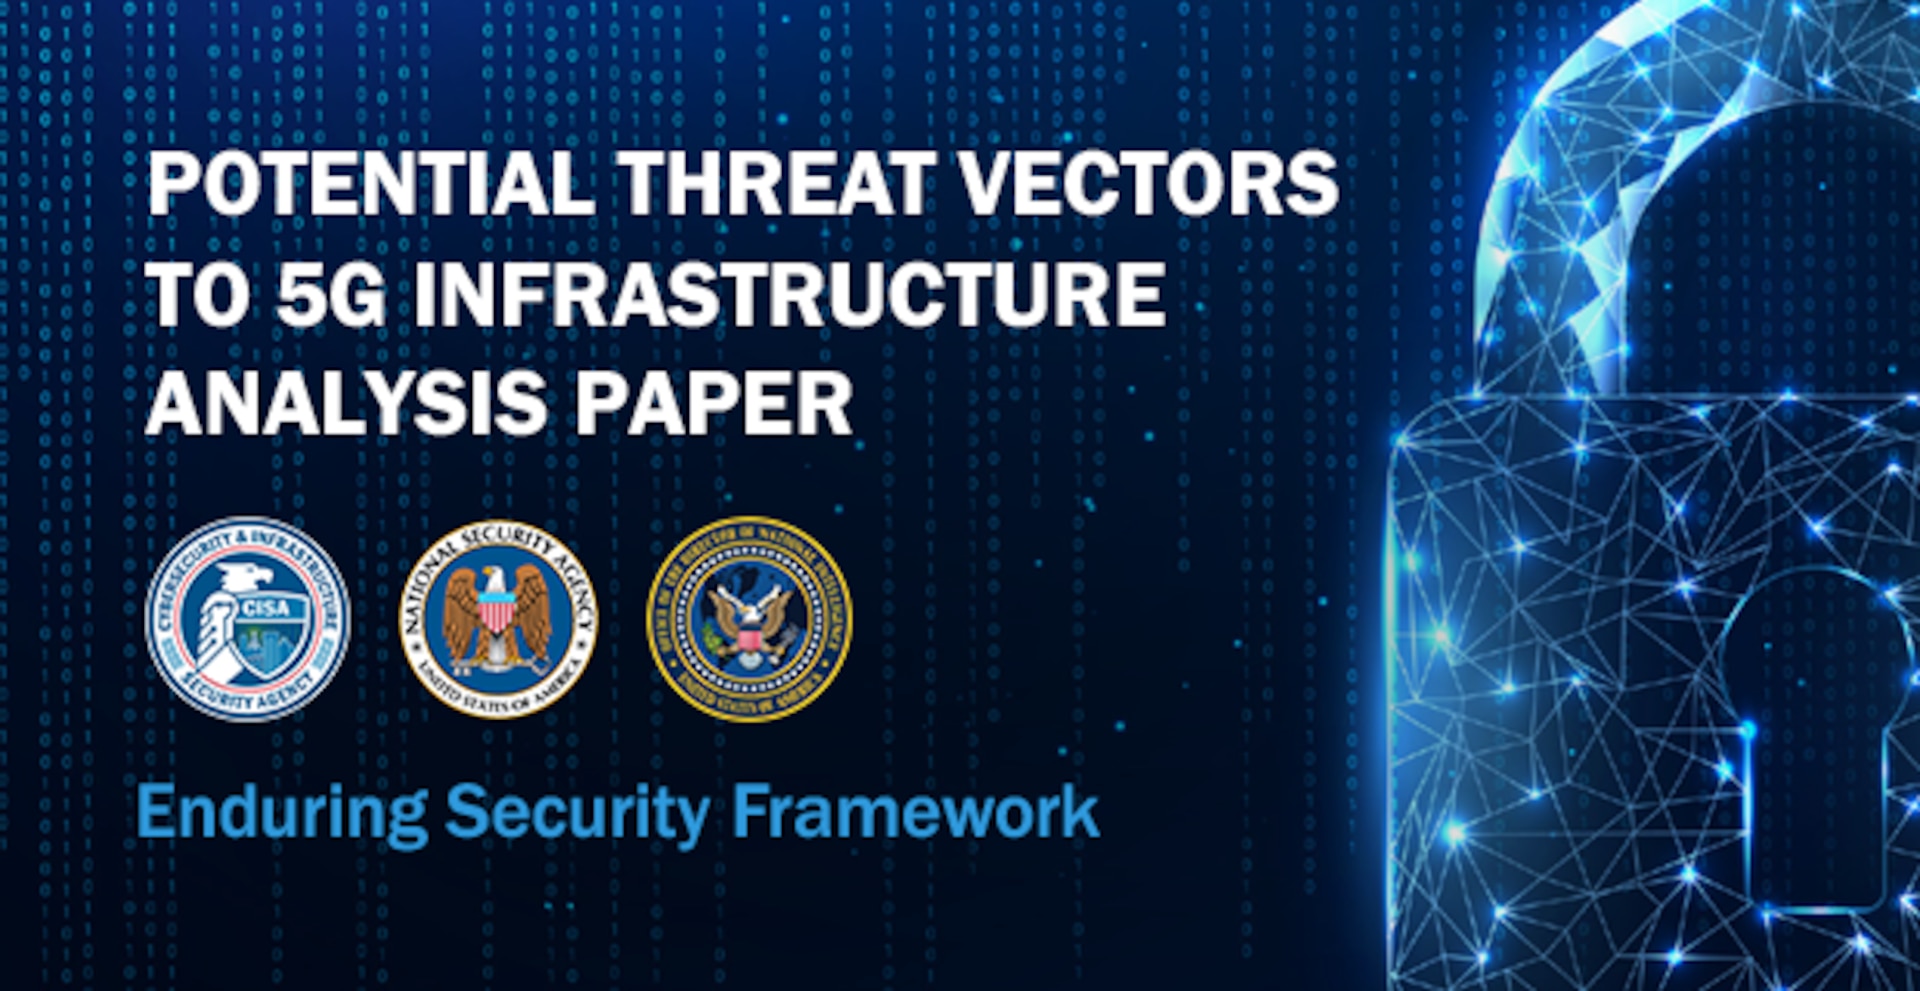 NSA Potential Threat Vectors to 5G Infrastructure Analysis Paper